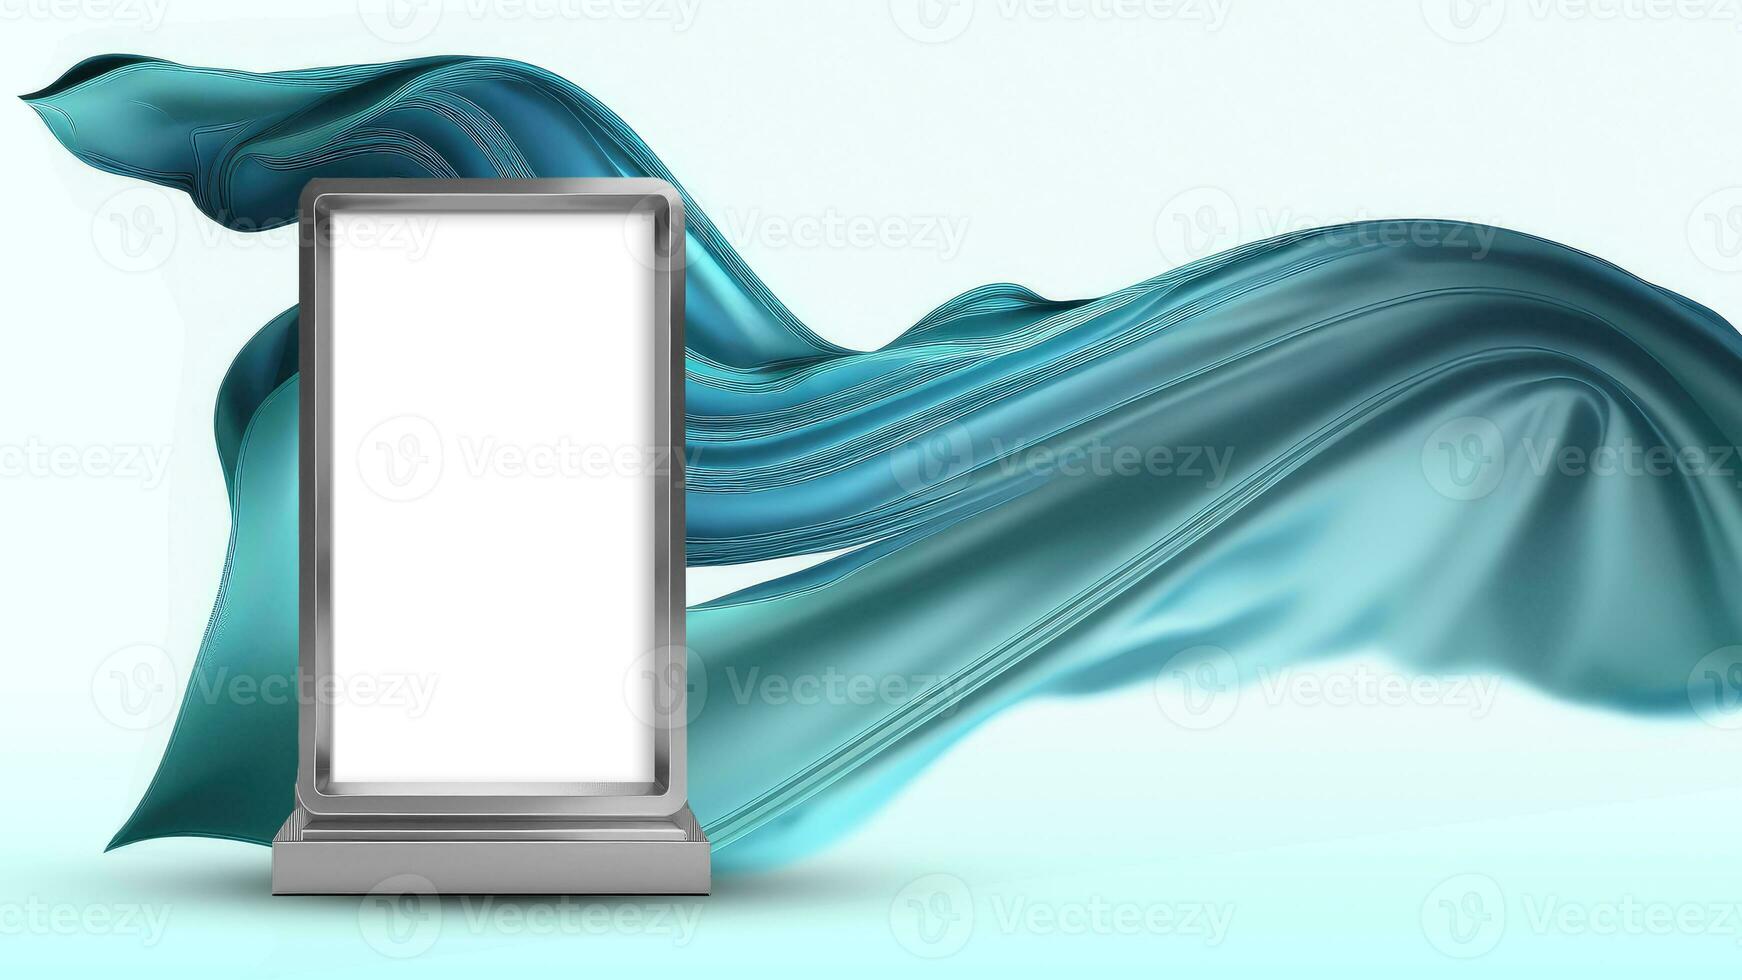 3D Render of Blank Silver Rectangle Frame Stand or Product Screen Mockup Against Blue Floating Silk Fabric Background. photo